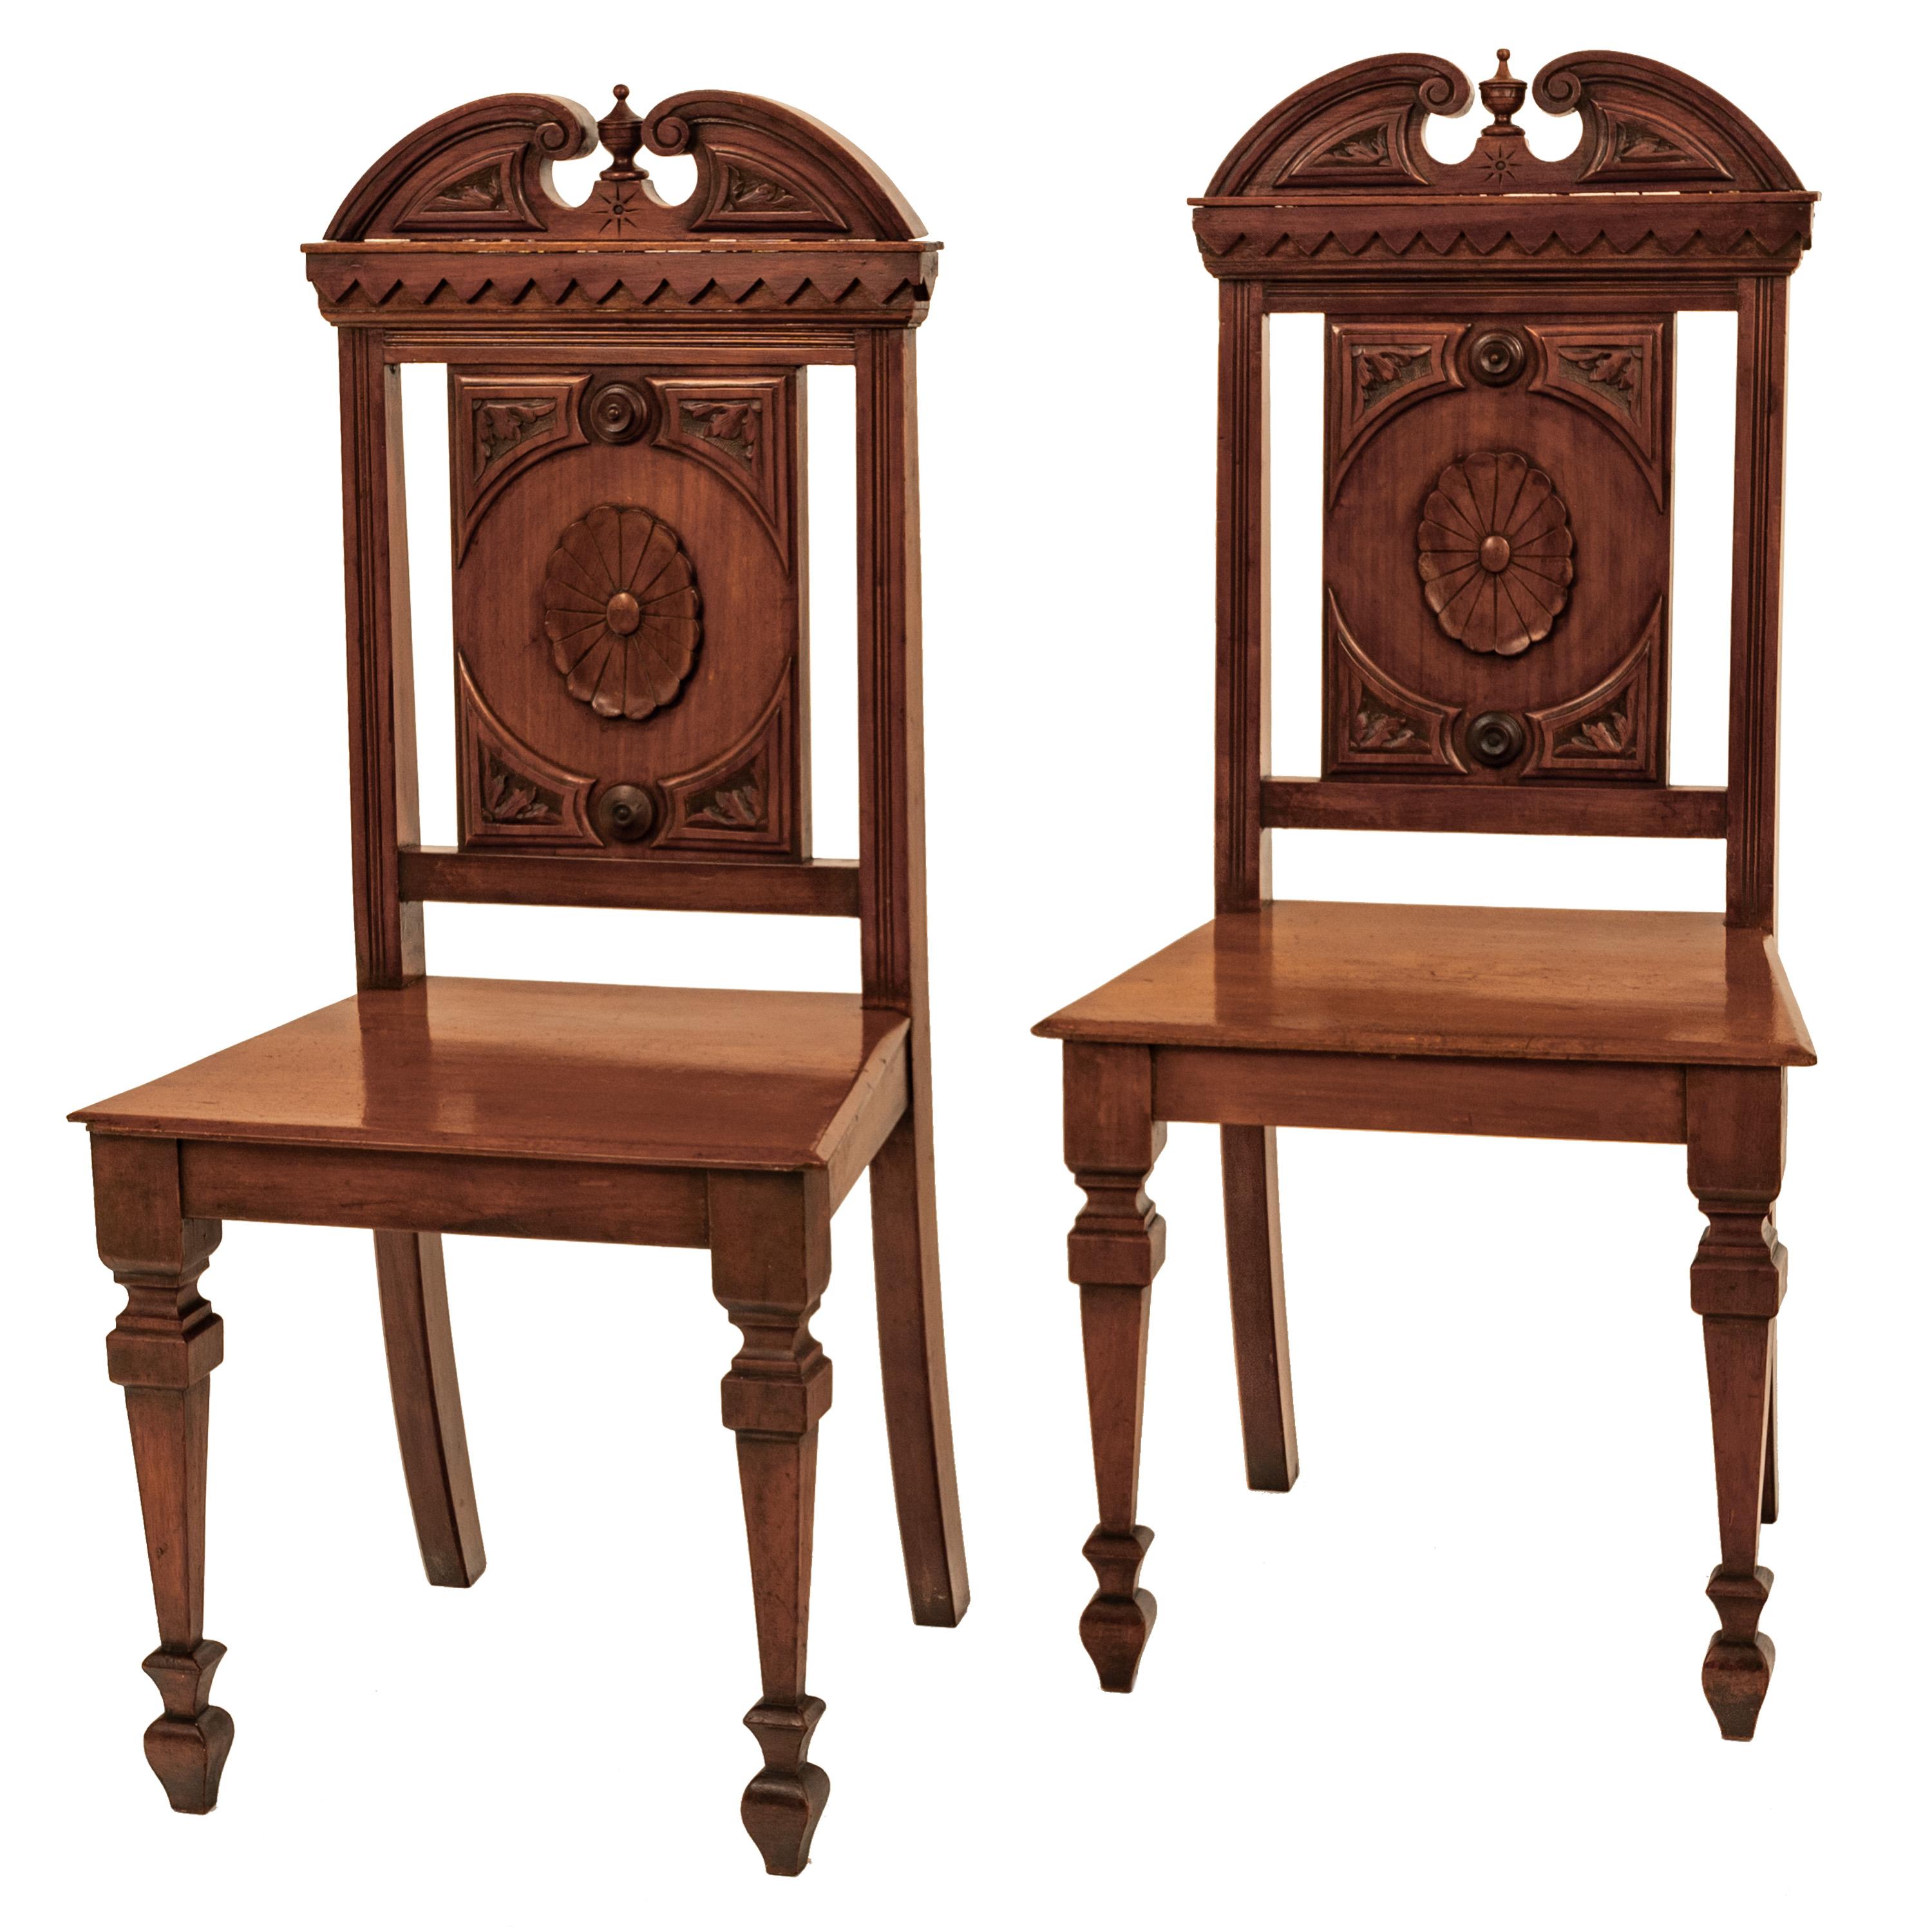 Neoclassical Antique Pair Regency George IV Neo-Classical Architectural Mahogany Hall Chairs For Sale